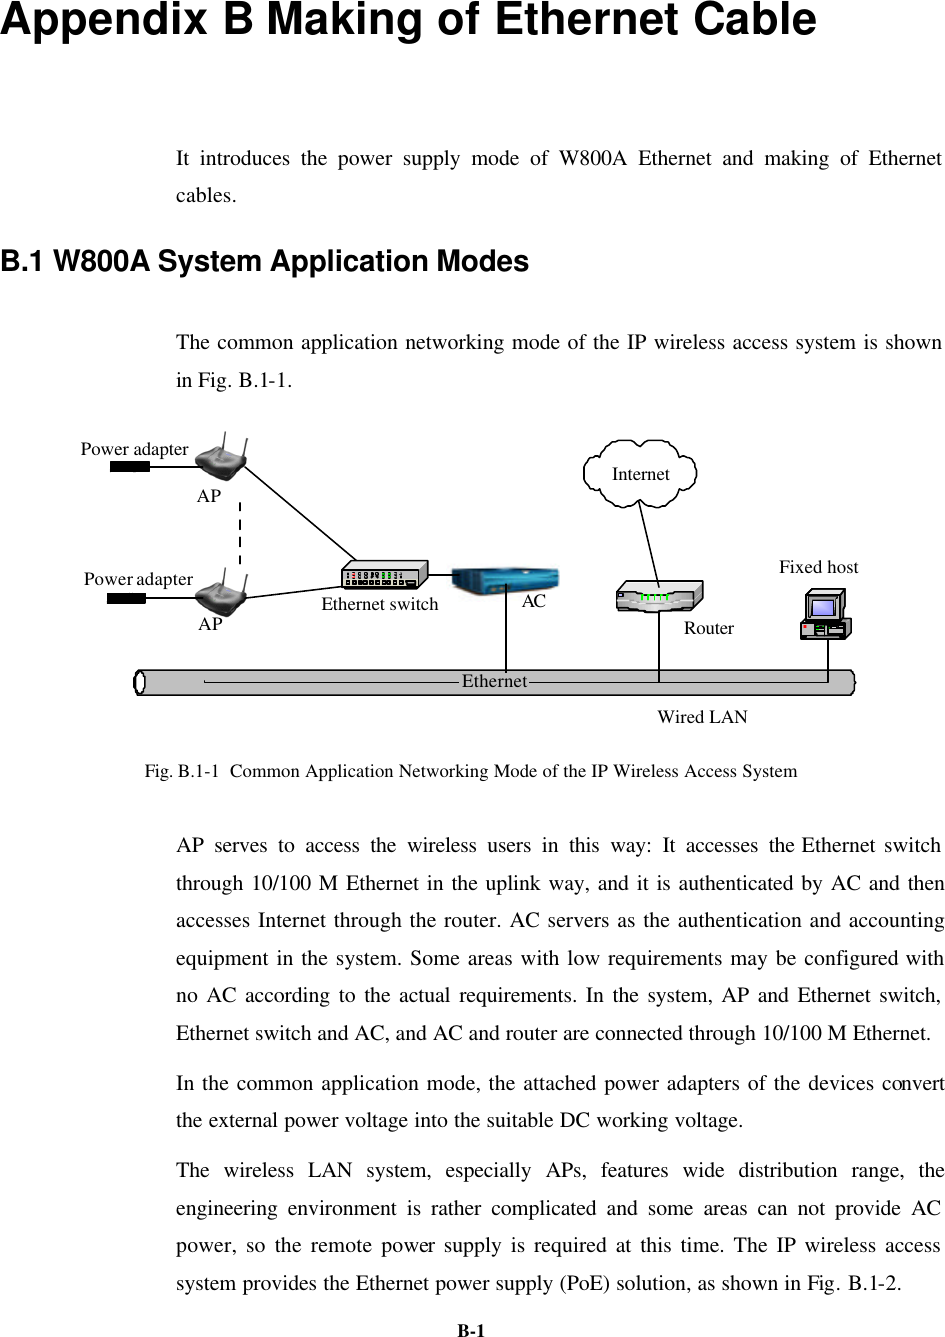   B-1Appendix B Making of Ethernet Cable   It introduces the power supply mode of W800A Ethernet and making of Ethernet cables. B.1 W800A System Application Modes The common application networking mode of the IP wireless access system is shown in Fig. B.1-1. EthernetRouterFixed hostWired LANAPAPACPower adapterPower adapterInternetEthernet switch Fig. B.1-1  Common Application Networking Mode of the IP Wireless Access System   AP serves to access the wireless users in this way: It accesses the Ethernet switch through 10/100 M Ethernet in the uplink way, and it is authenticated by AC and then accesses Internet through the router. AC servers as the authentication and accounting equipment in the system. Some areas with low requirements may be configured with no AC according to the actual requirements. In the system, AP and Ethernet switch, Ethernet switch and AC, and AC and router are connected through 10/100 M Ethernet.   In the common application mode, the attached power adapters of the devices convert the external power voltage into the suitable DC working voltage.   The wireless LAN system, especially APs, features wide distribution range, the engineering environment is rather complicated and some areas can not provide AC power, so the remote power supply is required at this time. The IP wireless access system provides the Ethernet power supply (PoE) solution, as shown in Fig. B.1-2. 